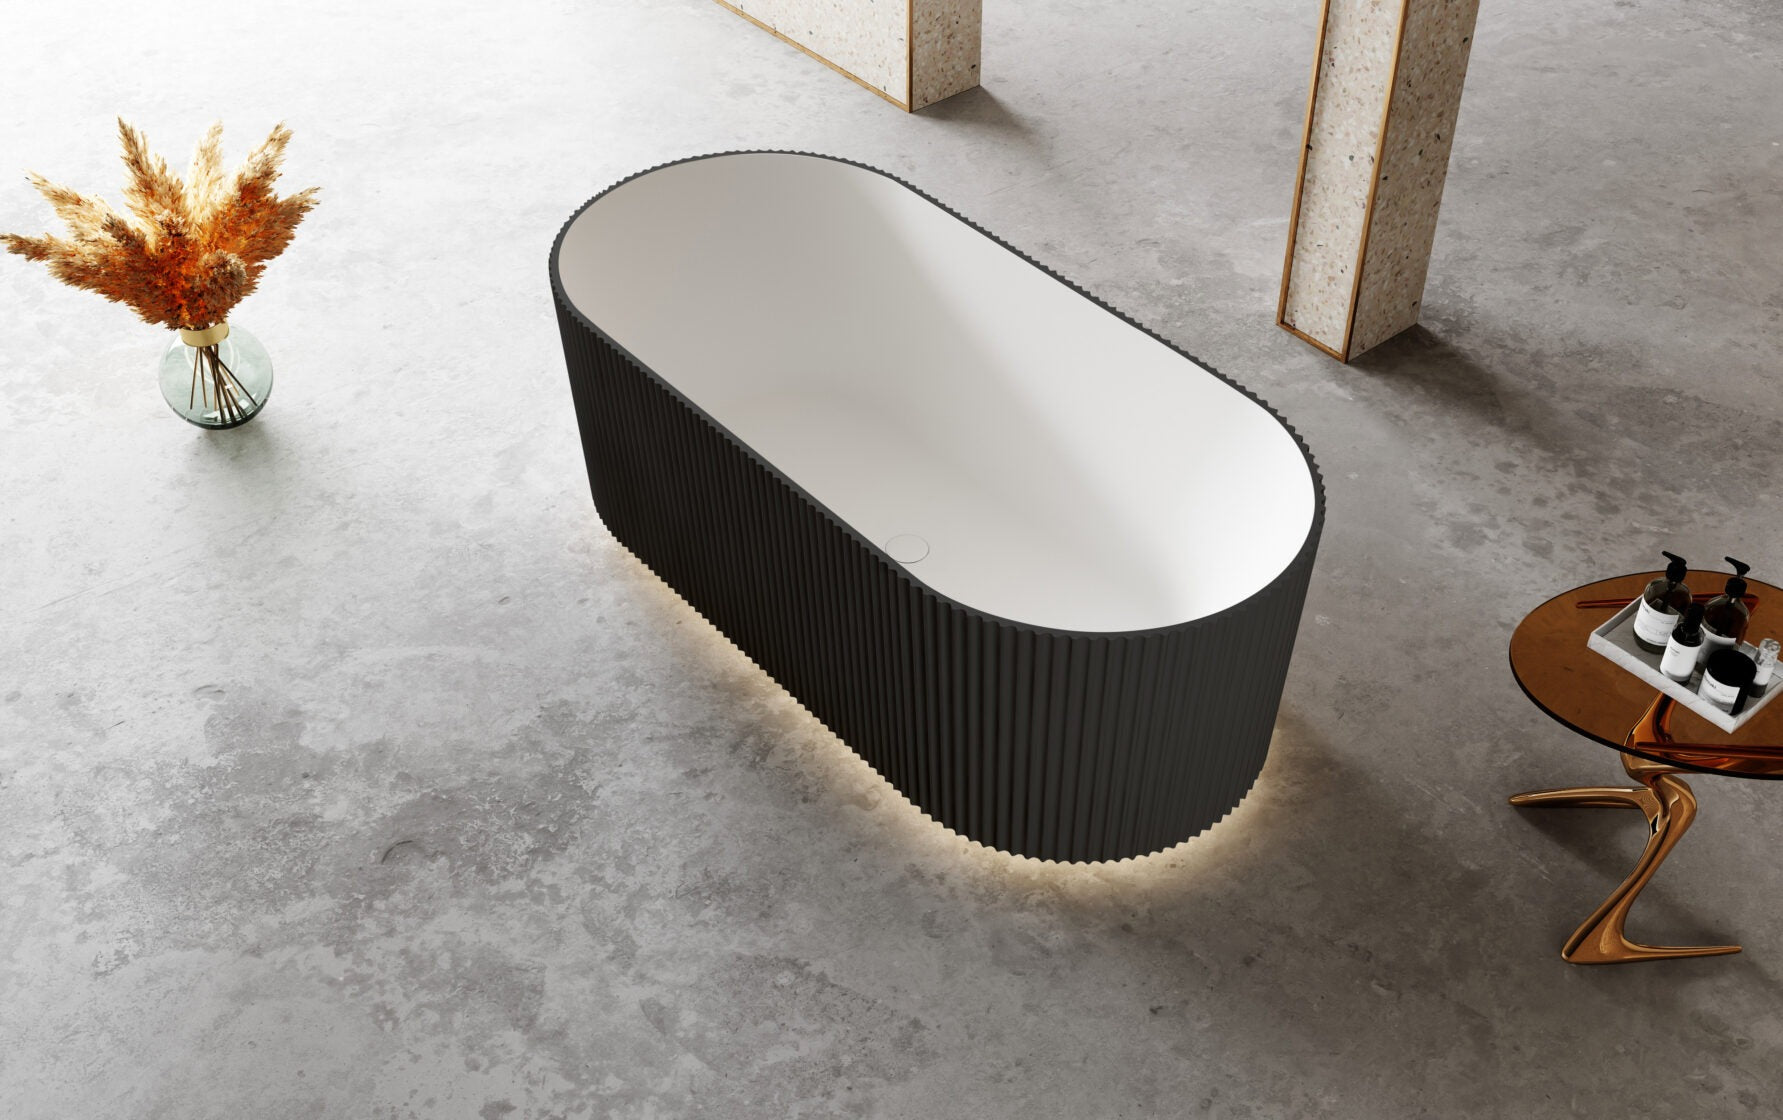 RIVA OSLO V-GROOVE FREESTANDING BATHTUB MATTE WHITE AND BLACK (AVAILABLE IN 1500MM AND 1700MM)